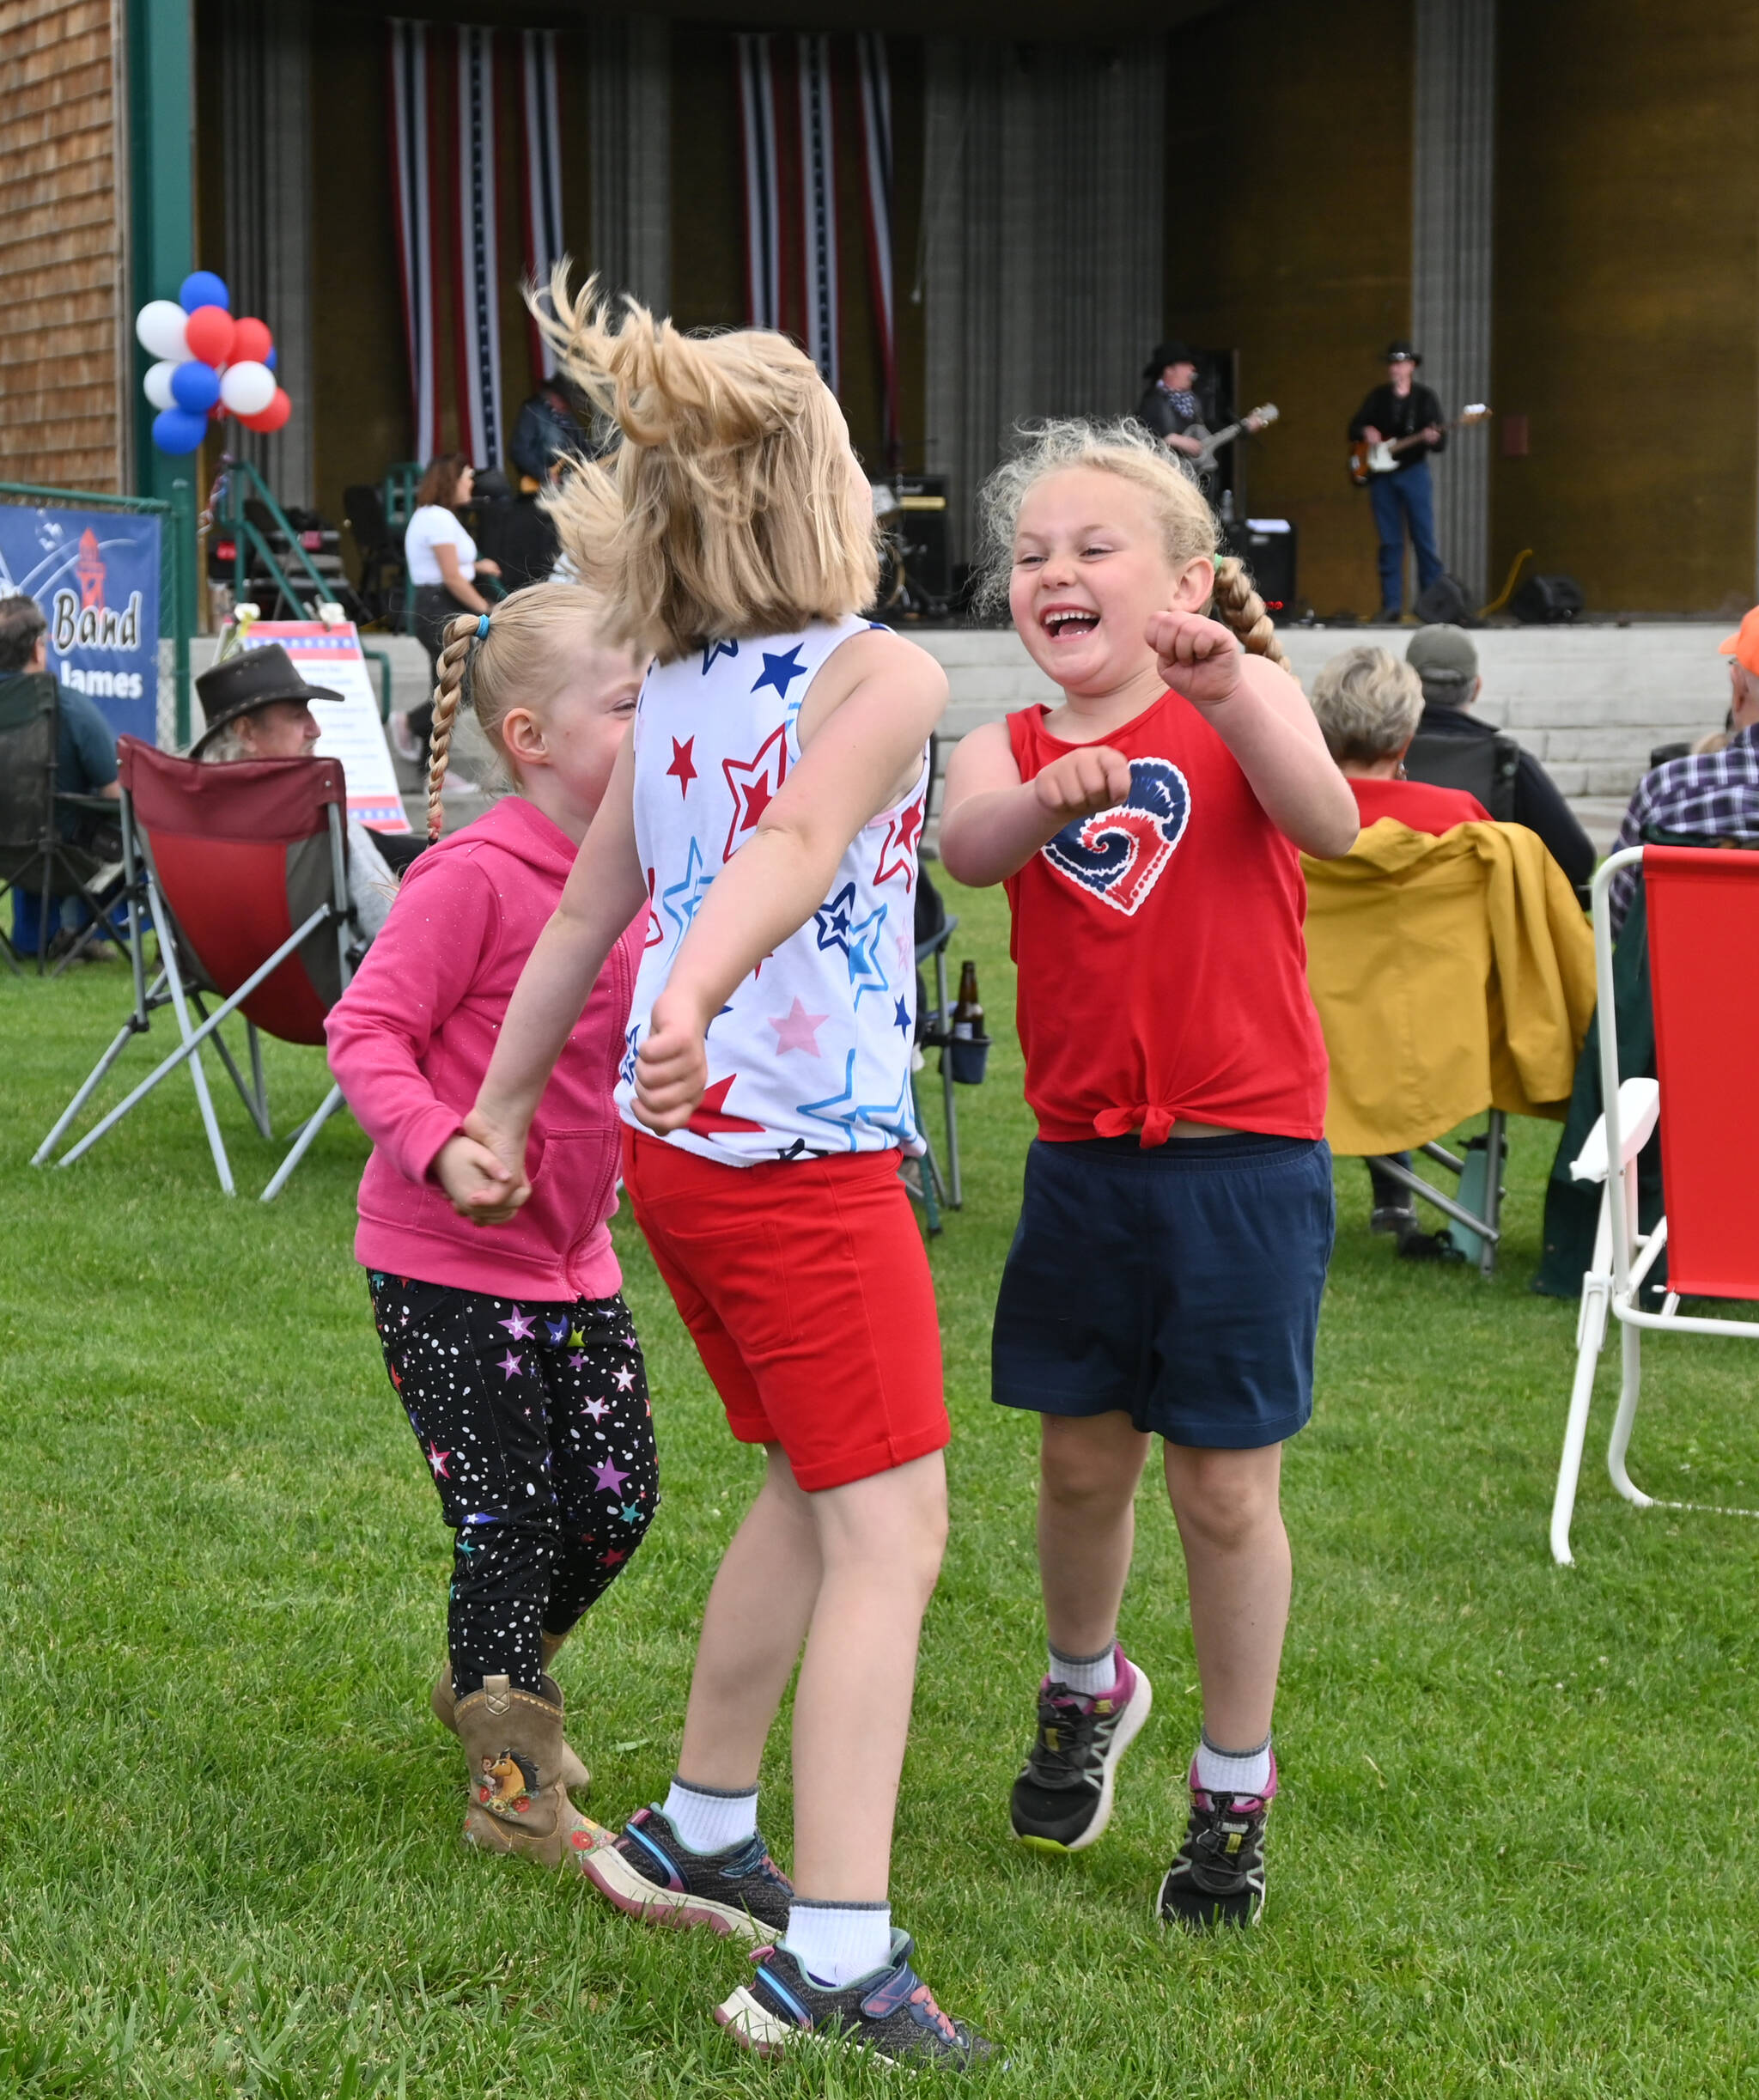 Sequim Gazette photo by Michael Dashiell / From left, Willa Steele, 4, Amelia McBride, 7, and Alexis McBride, 6, enjoy the tunes of the Buck Ellard Band at the Independence Day Celebration at the James Center for Performing Arts on July 4.